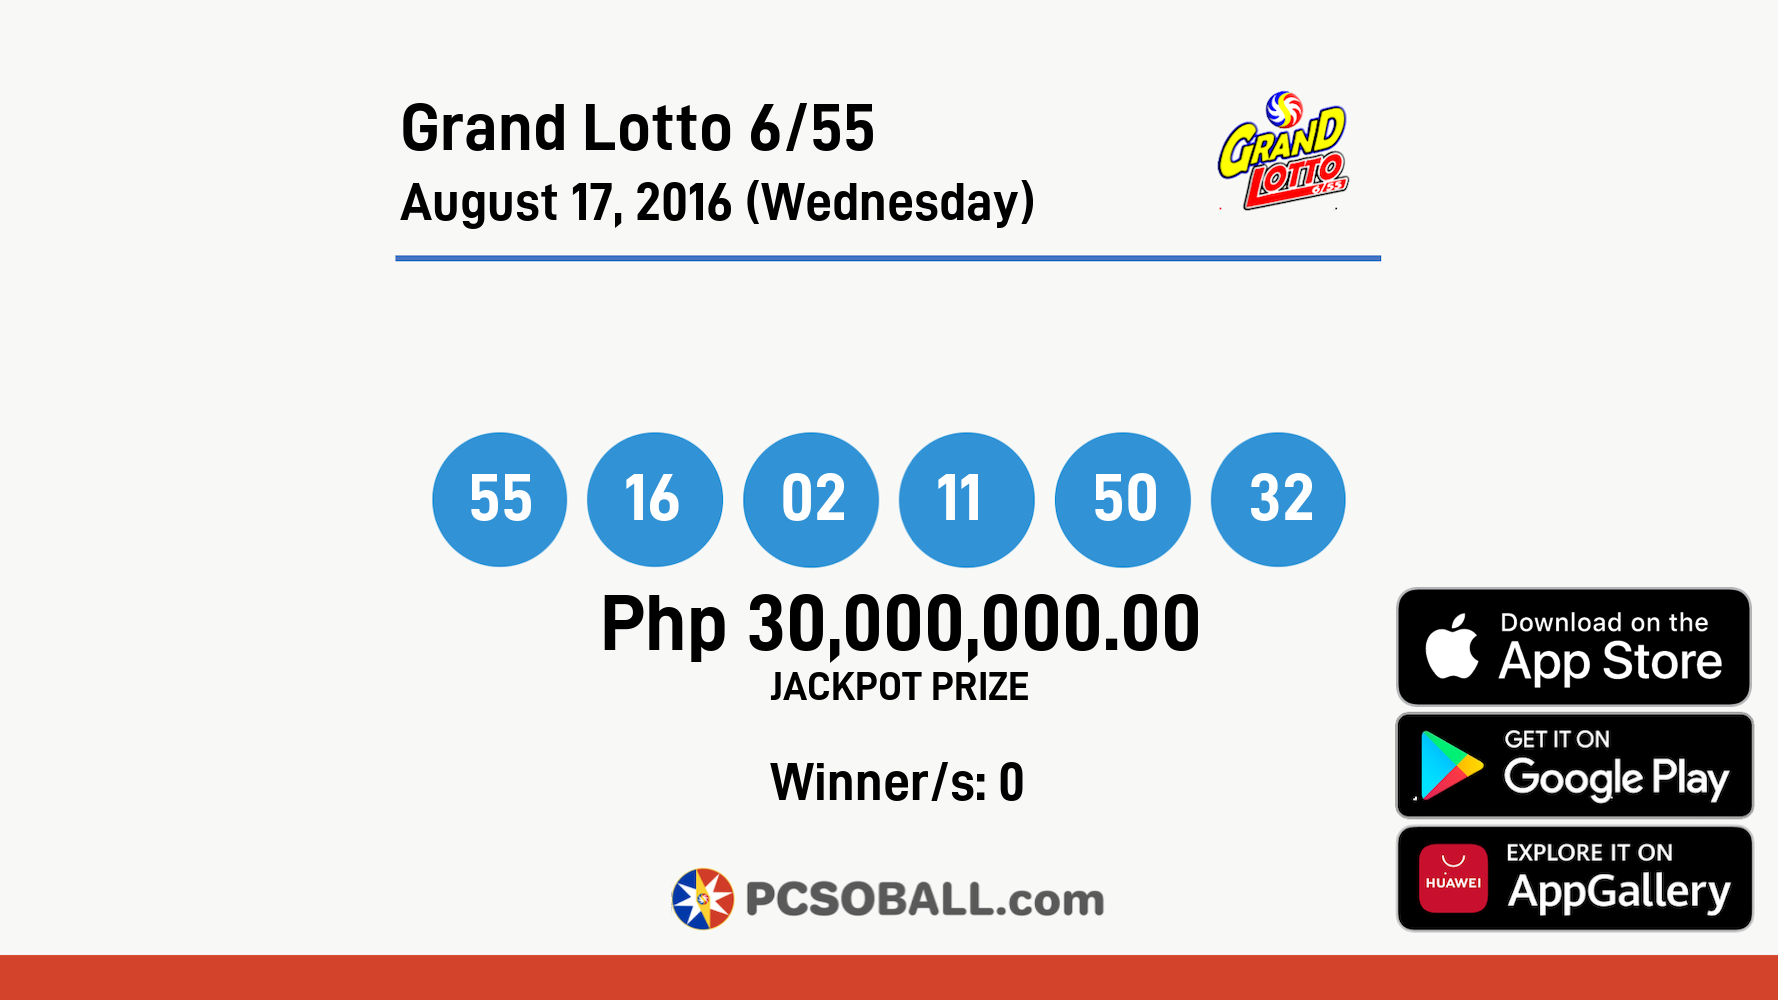 Grand Lotto 6/55 August 17, 2016 (Wednesday) Result